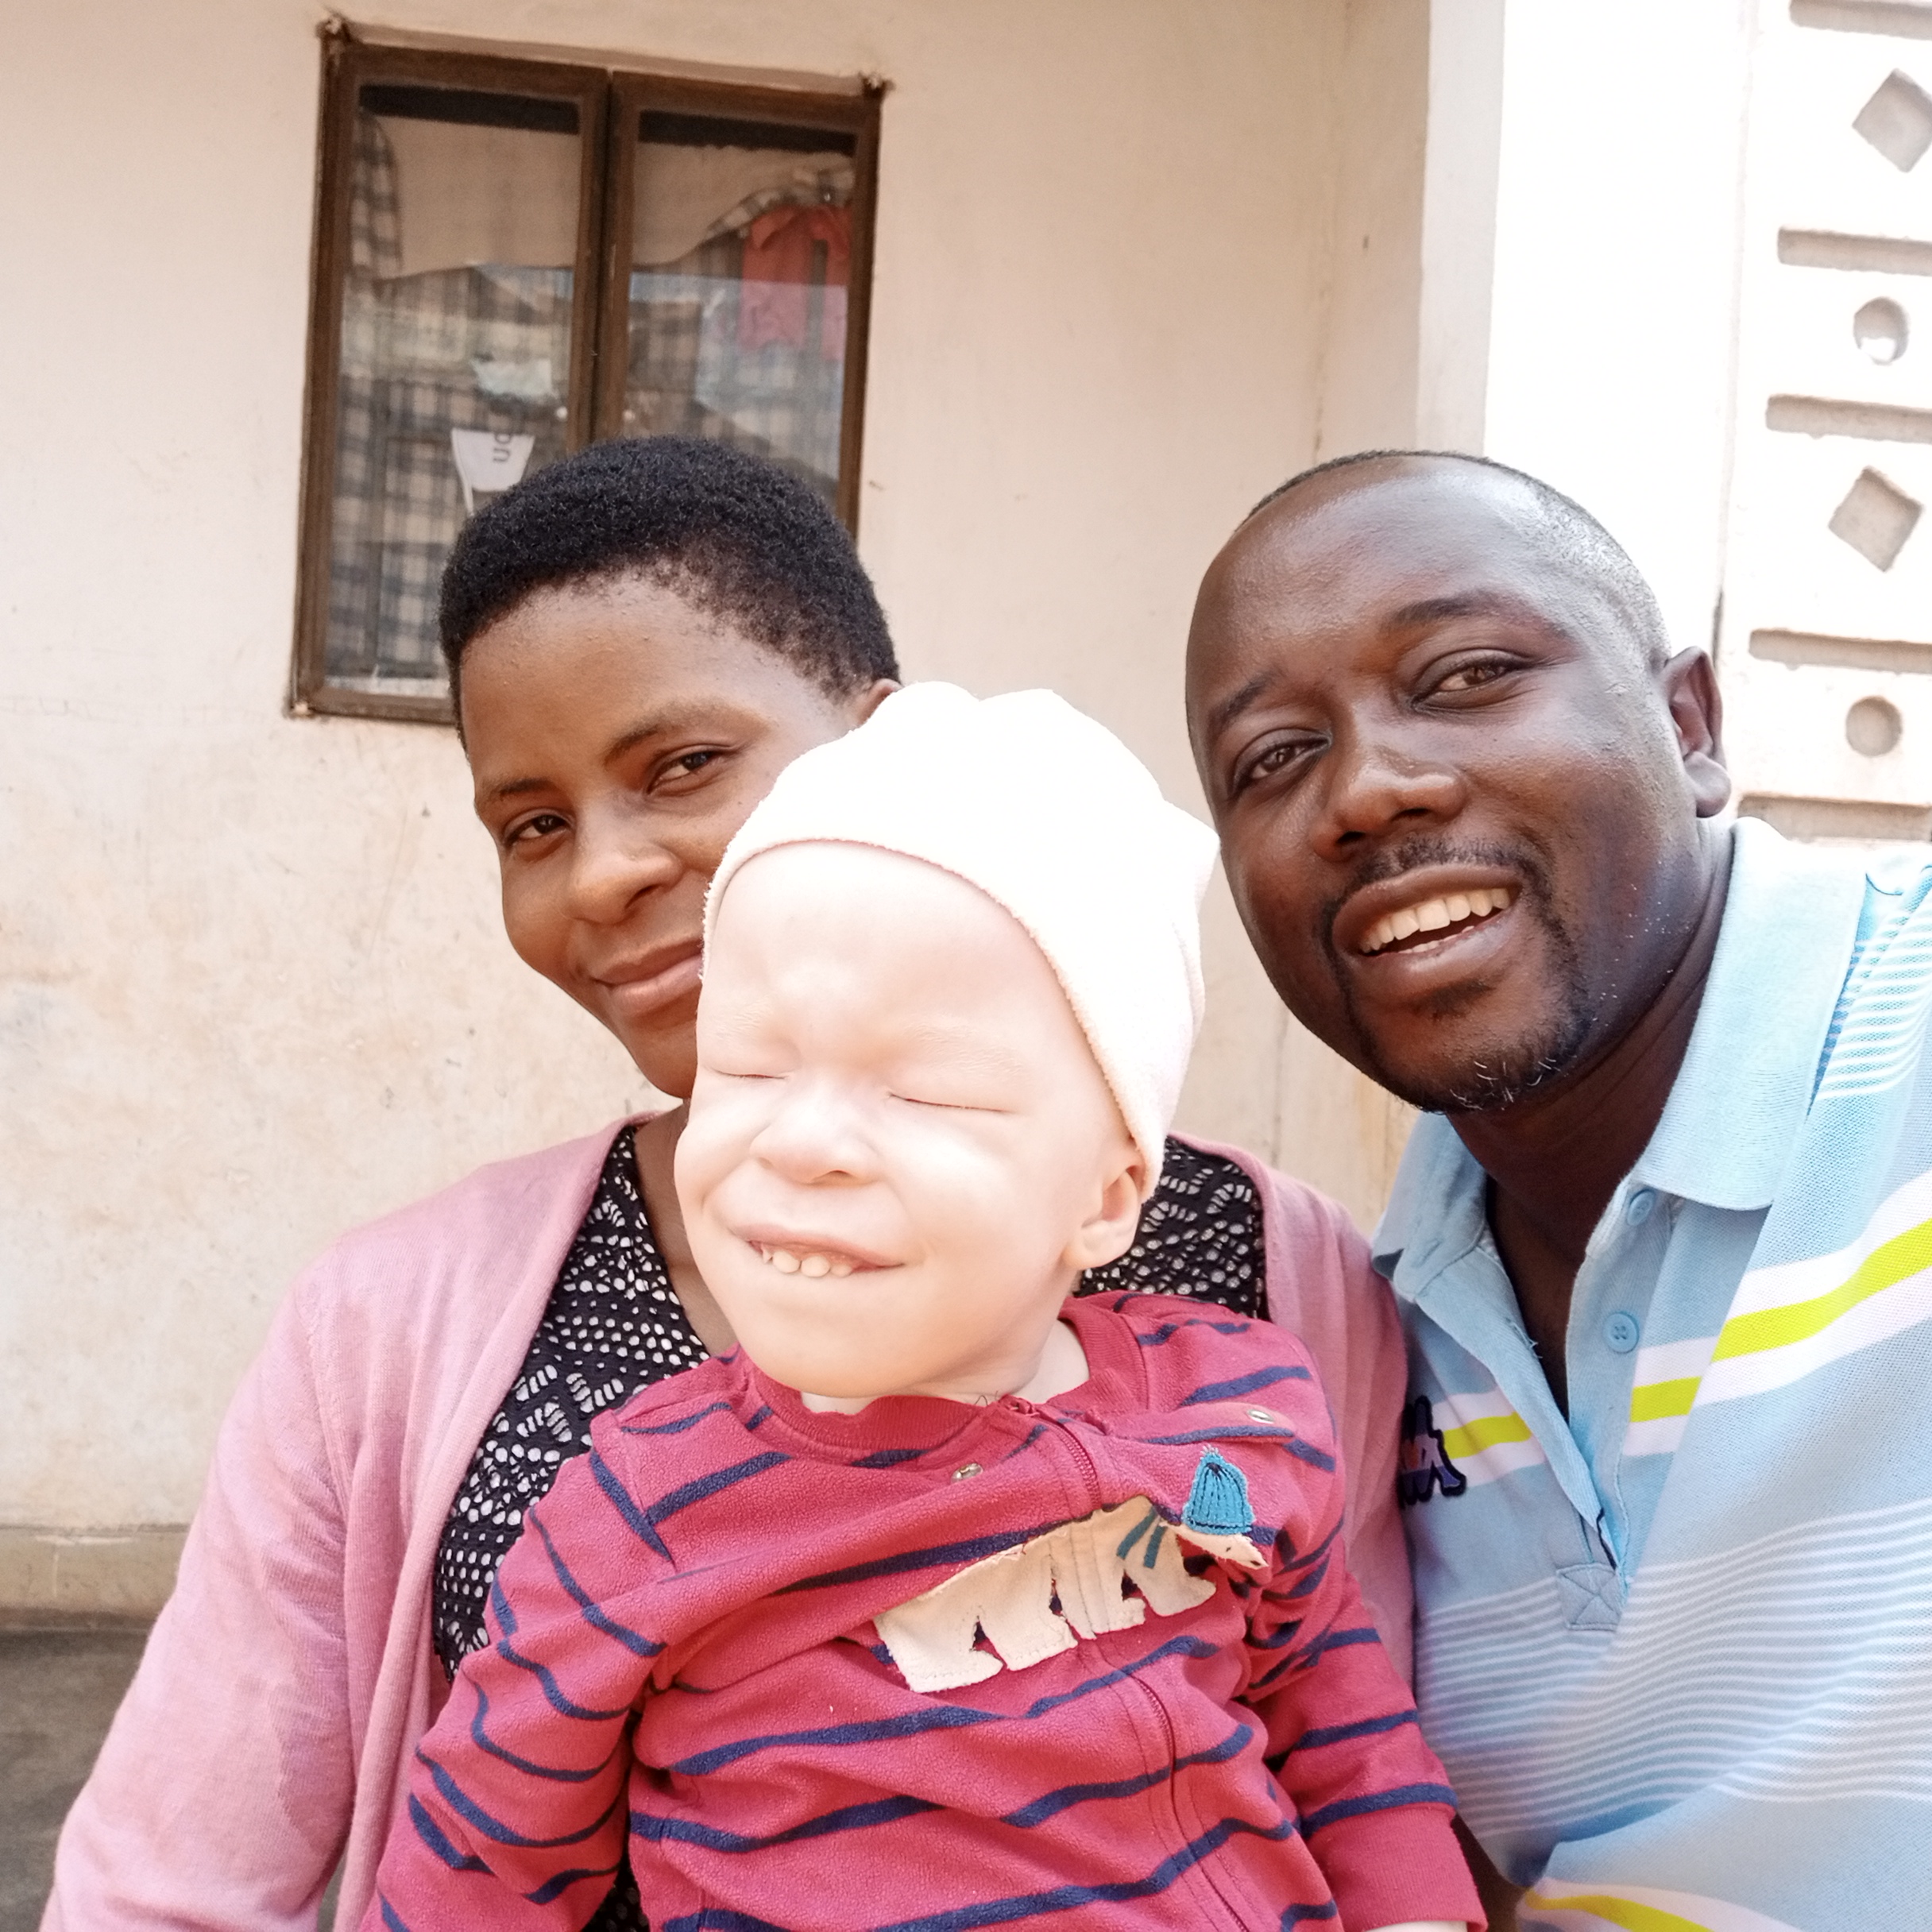  He was abandoned by his father after birth on knowing he was born with a condition of Albinism. Sandra the mother survive on mercies of good Samaritans like you, Albinism is condition where a child is born when lacking melanin, their skin, hair, eyes have low vision, above their skins have high  chances of getting cancer when exposed to sun's ultra violet radiation.